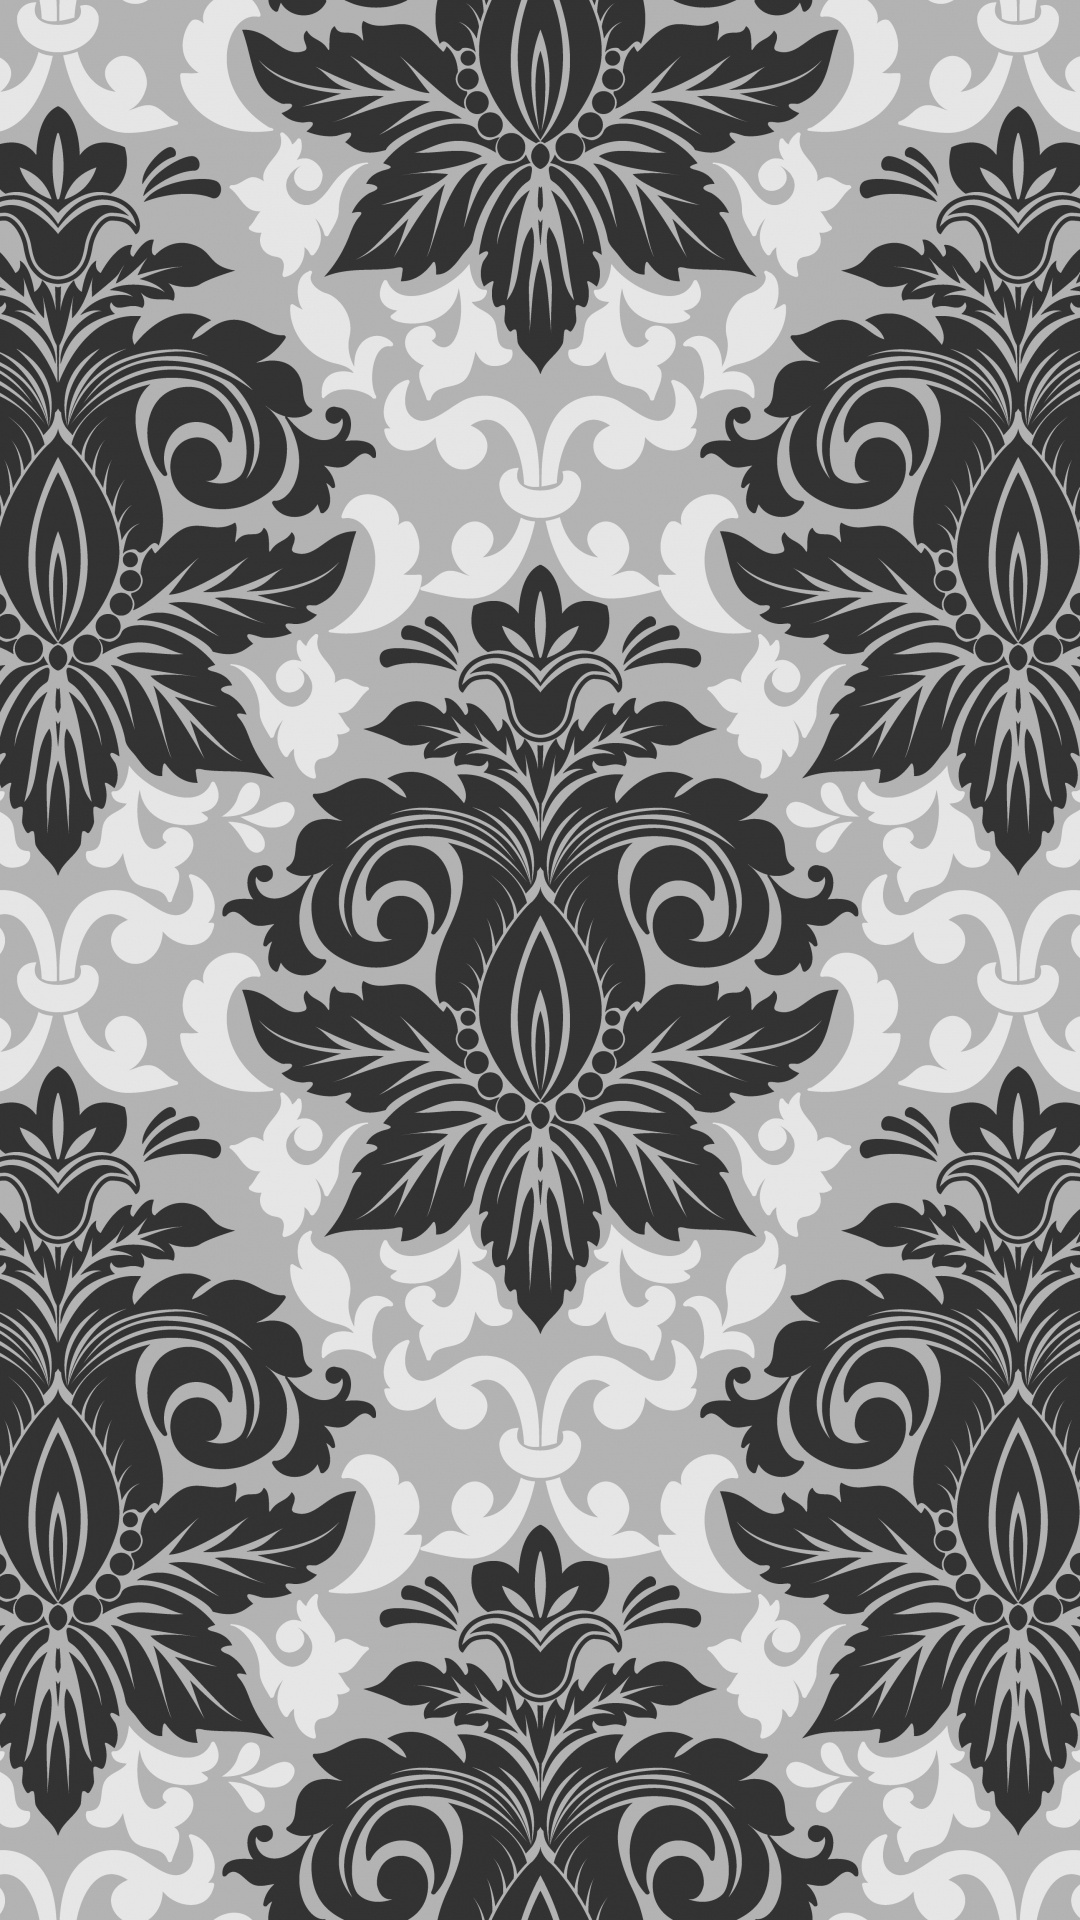 Black and White Floral Textile. Wallpaper in 1080x1920 Resolution